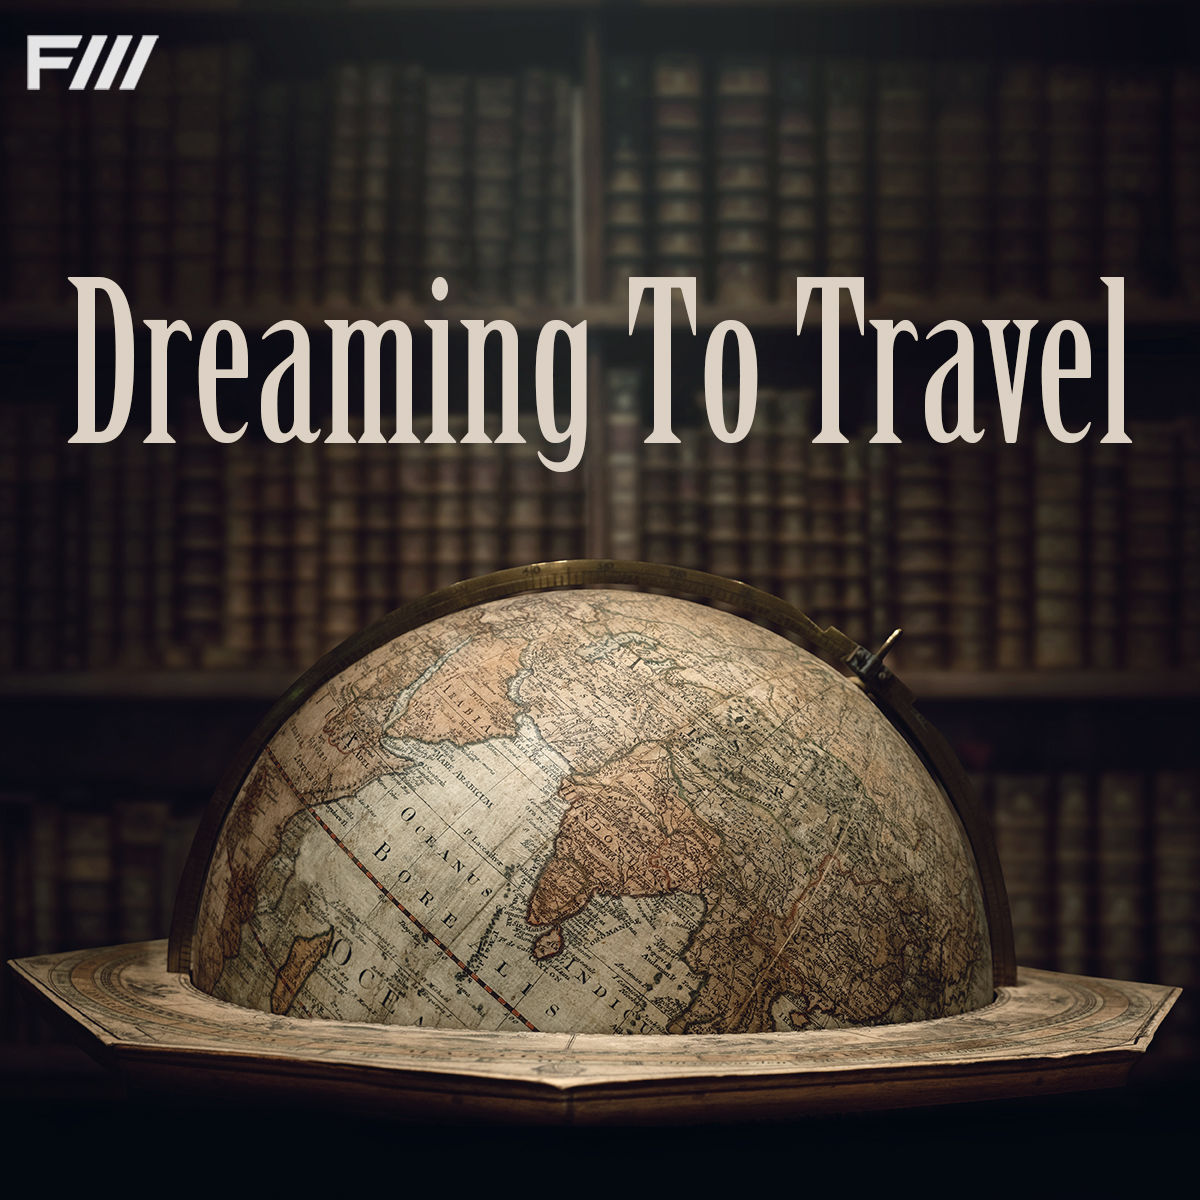 Dreaming To Travel